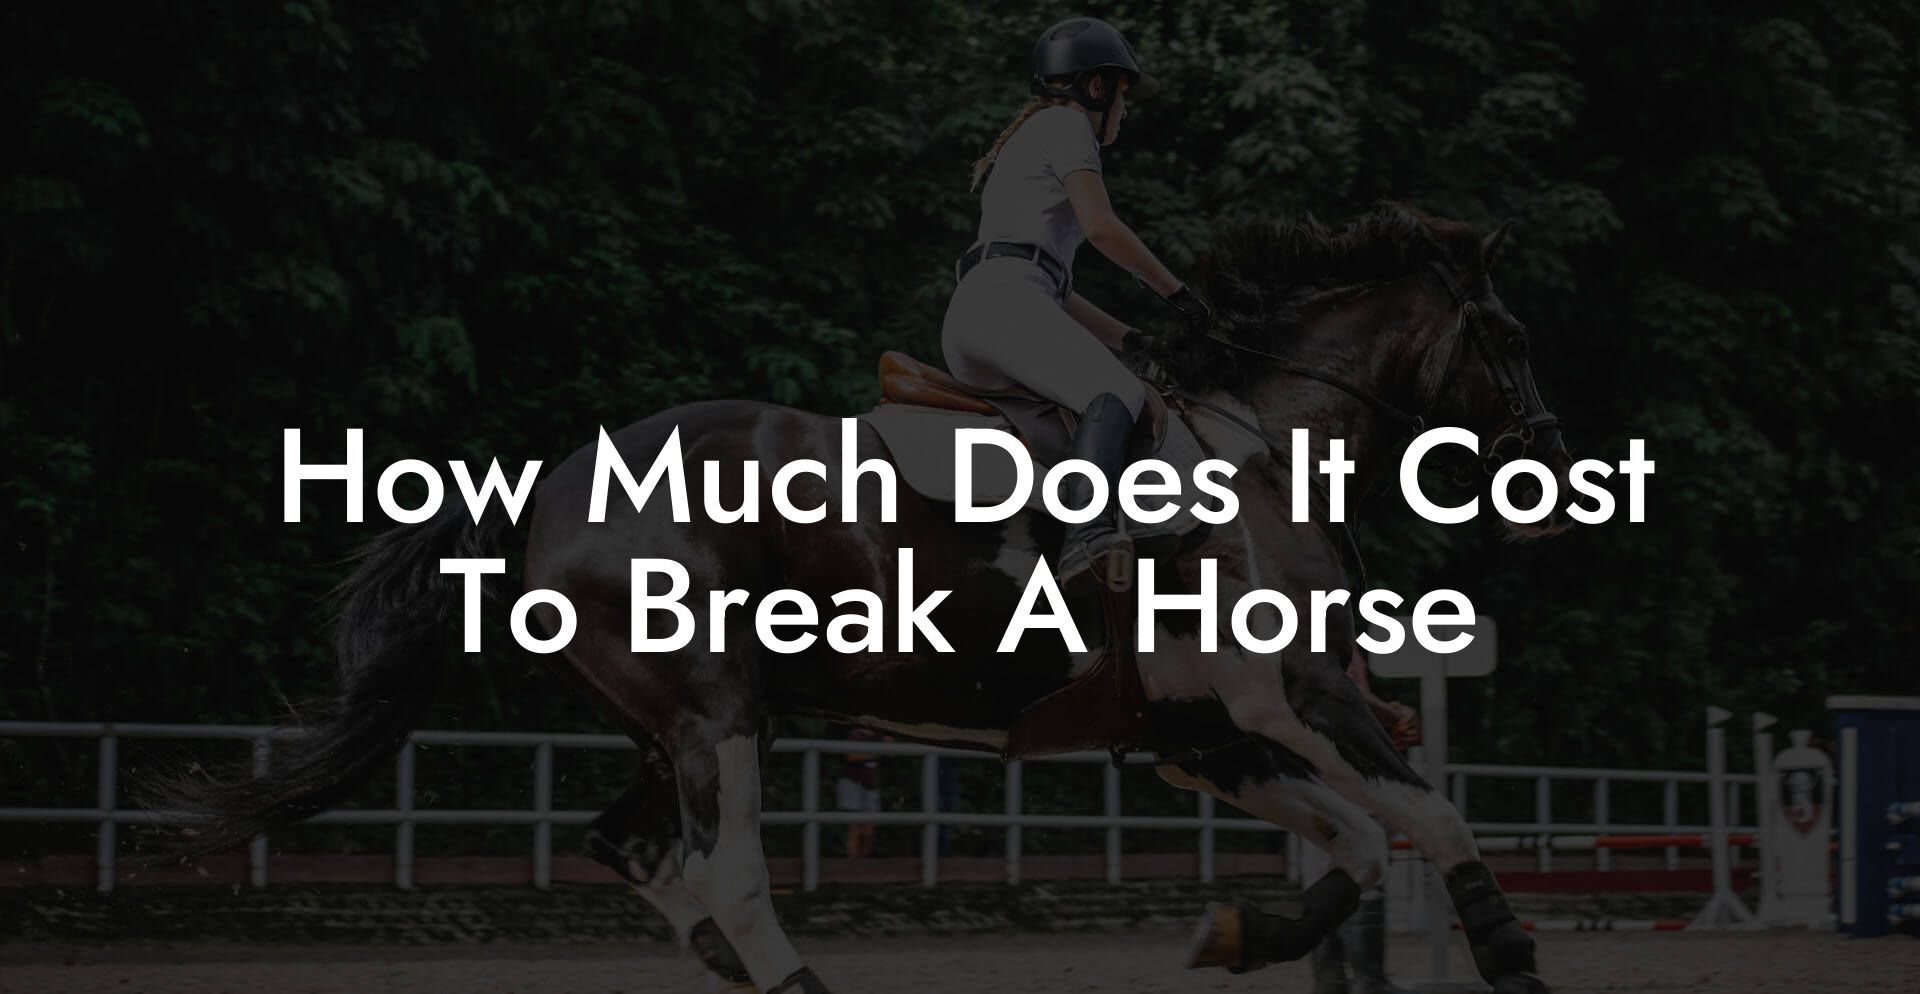 How Much Does It Cost To Break A Horse